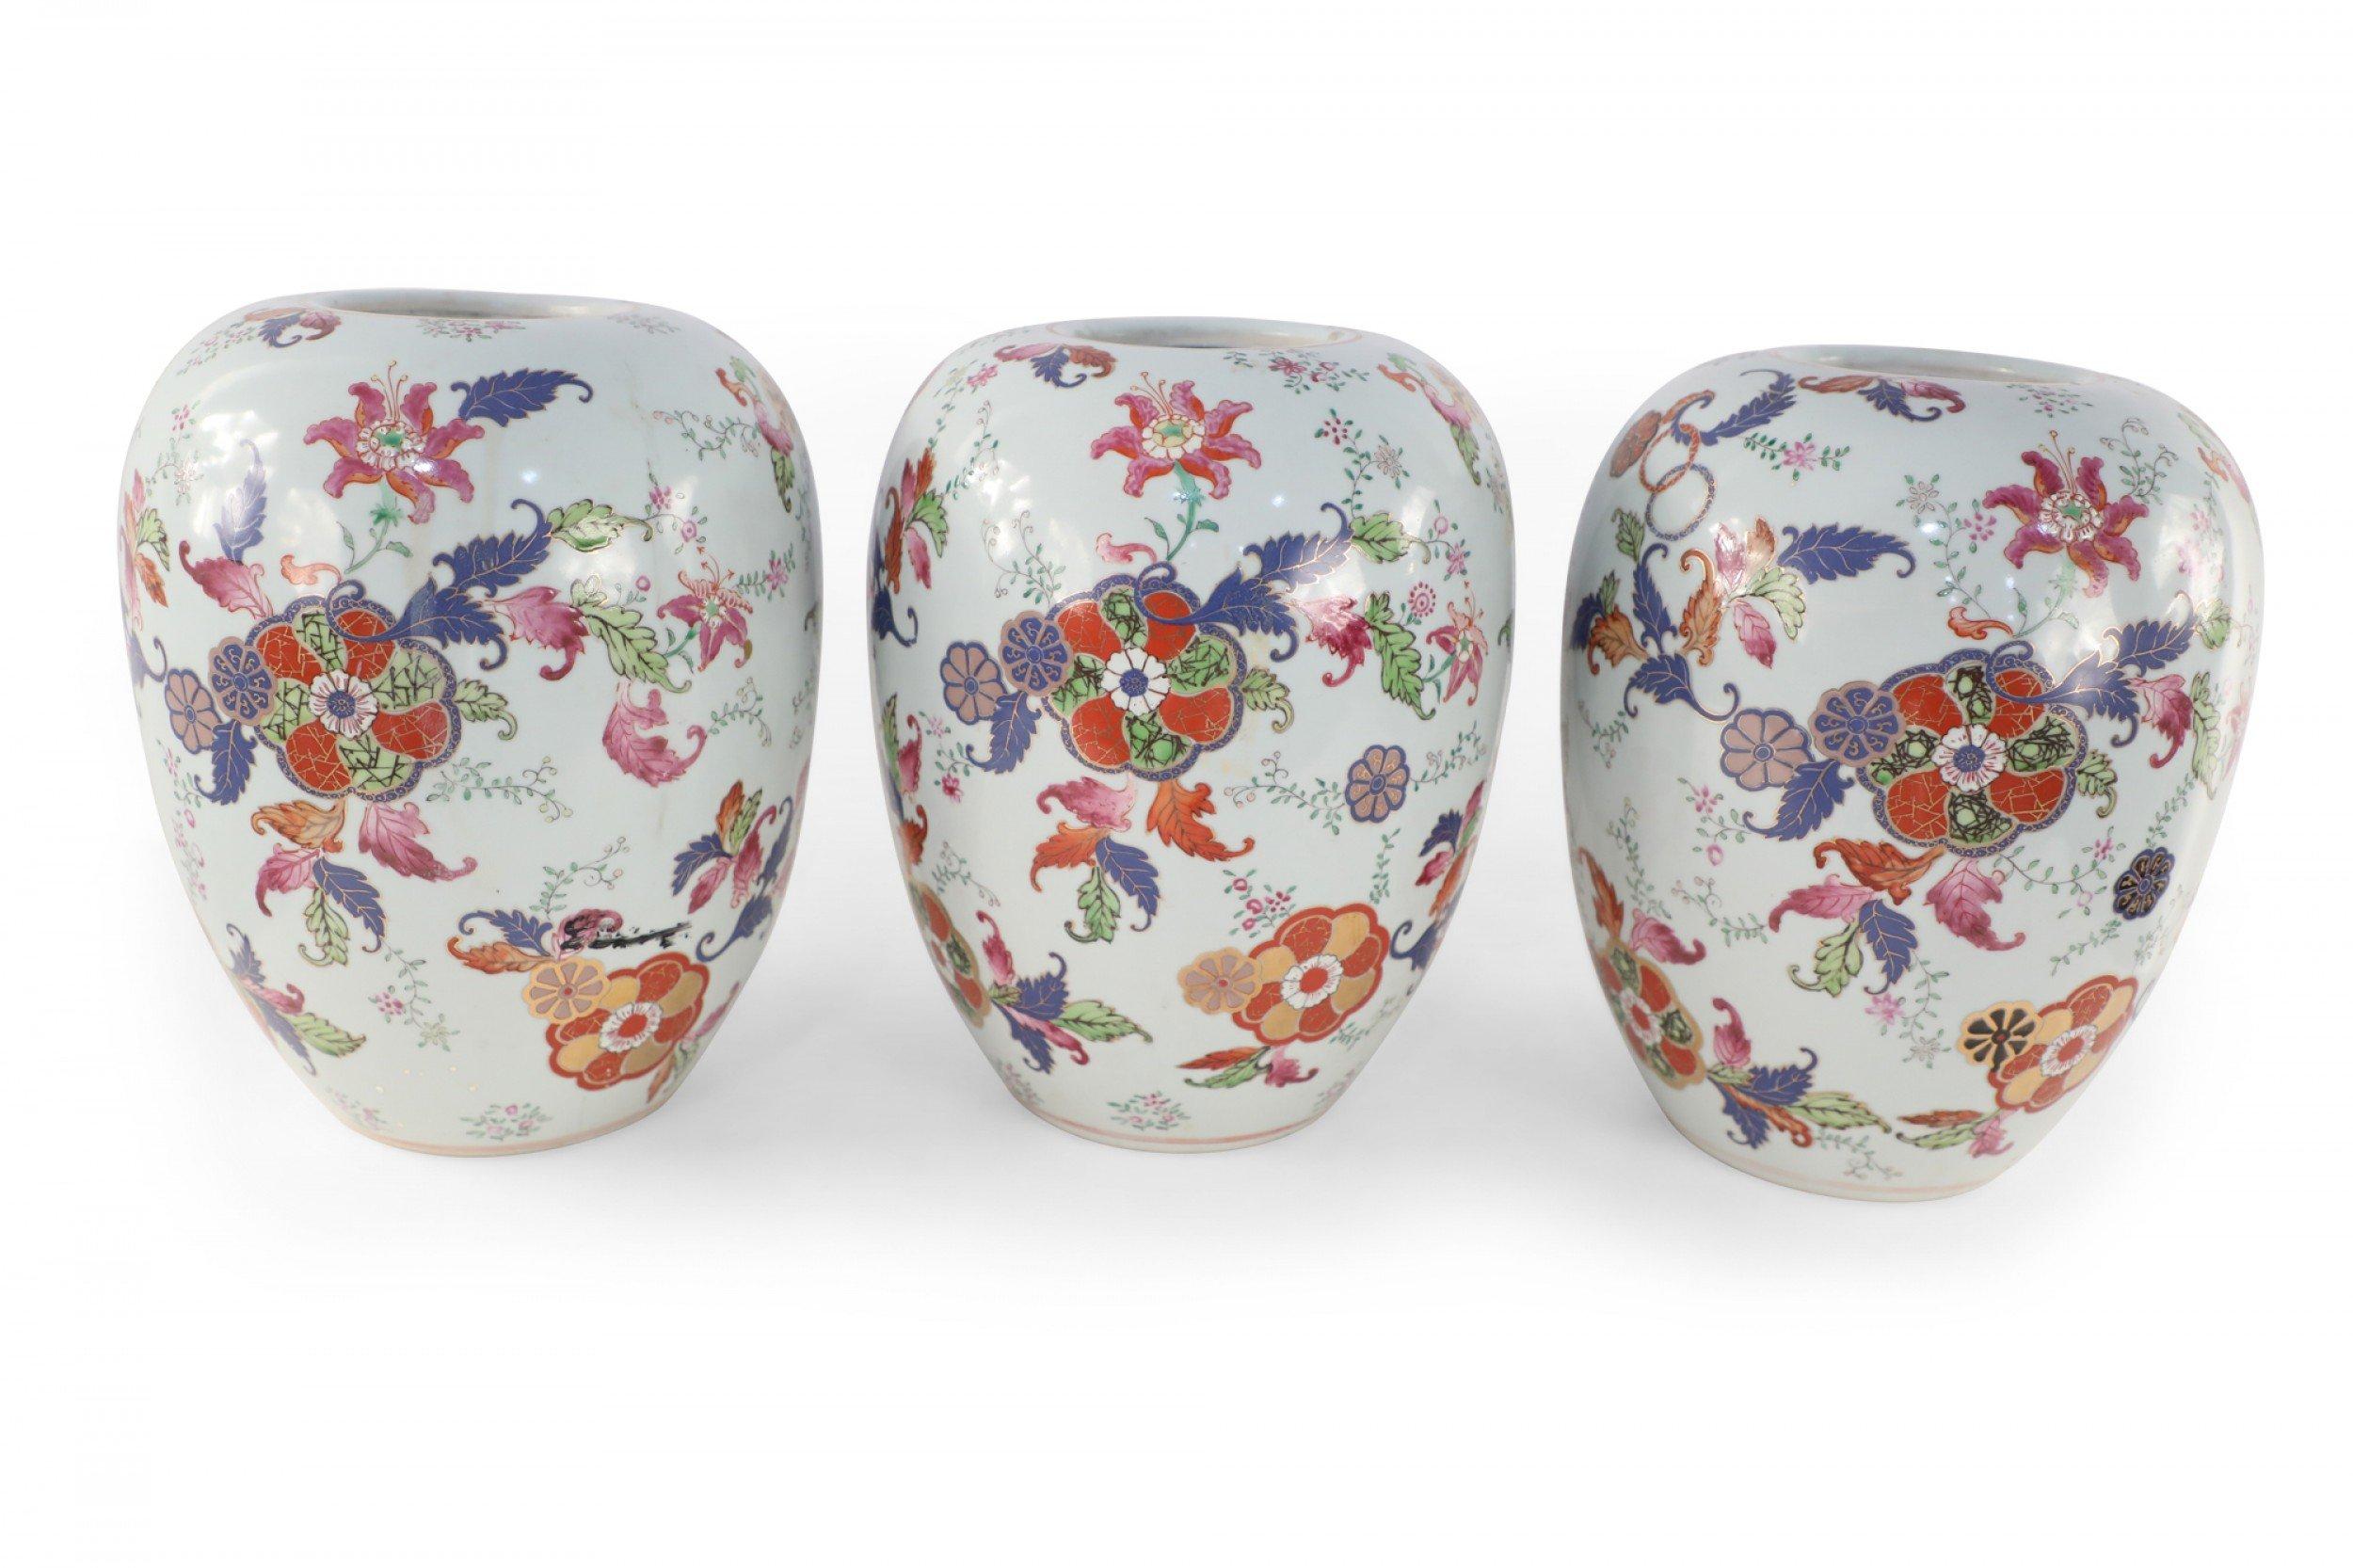 Chinese White and Floral Pattern Porcelain Jars For Sale 1